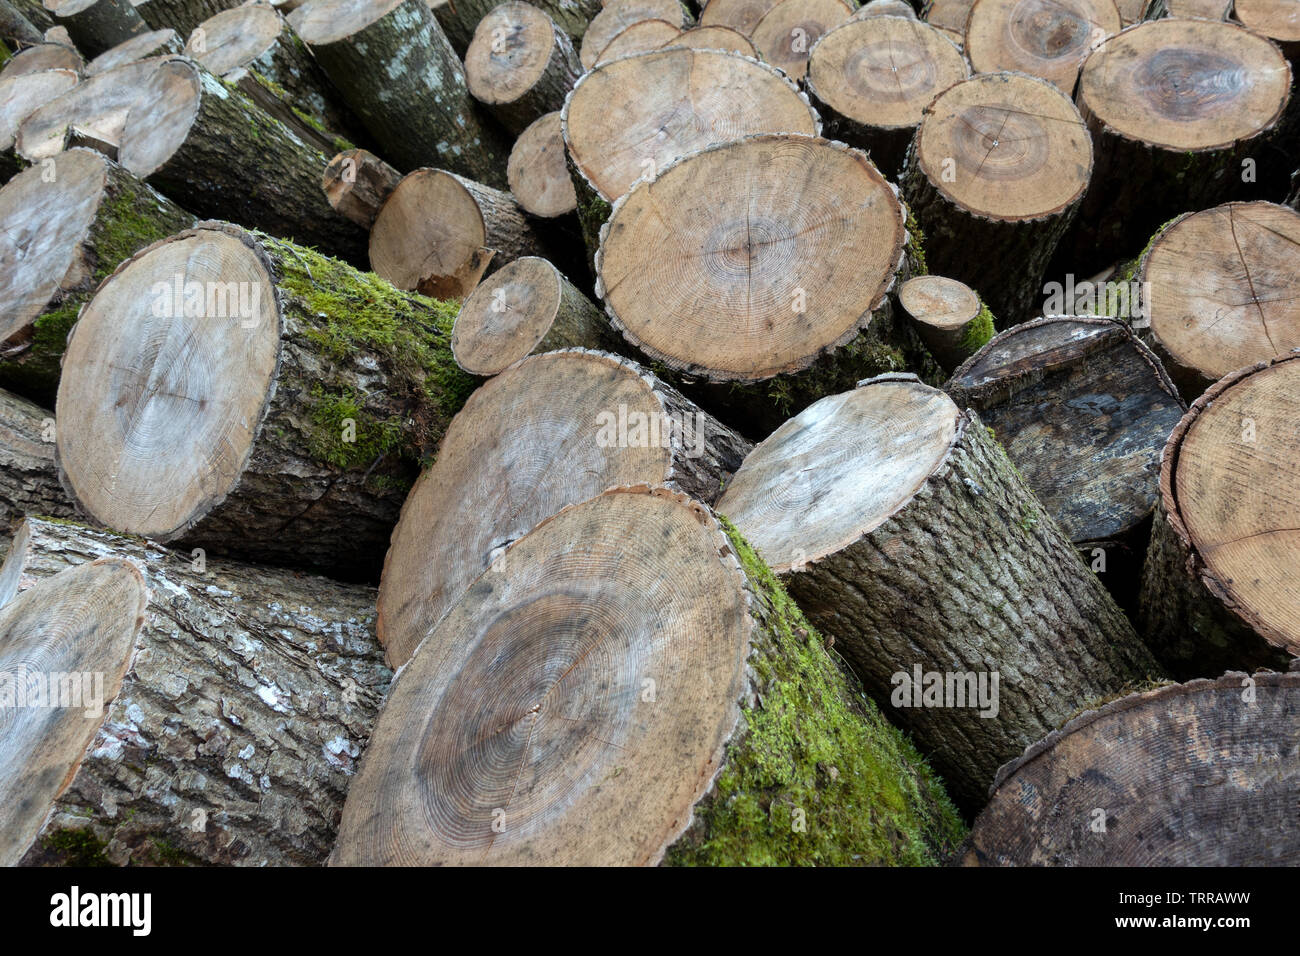 Wood storage with disordered tree trunks Stock Photo